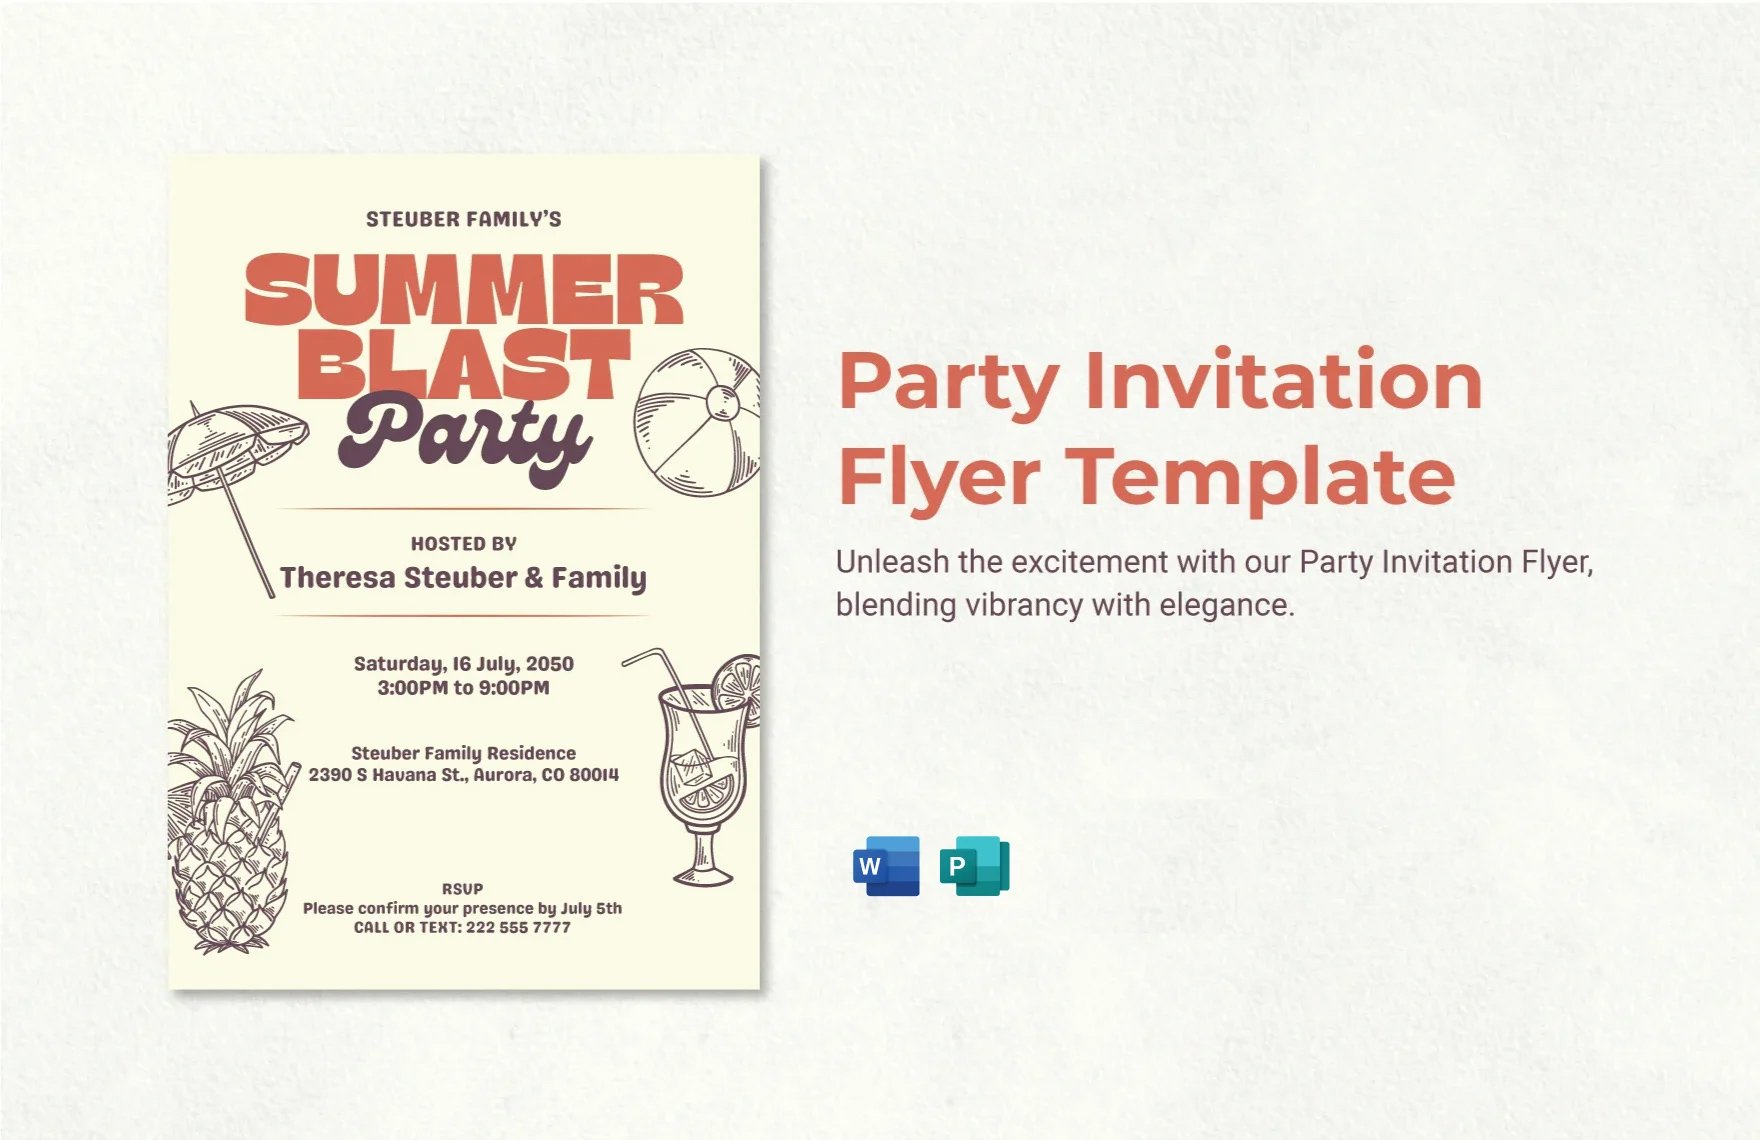 Free Party Invitation Flyer Template in Word, Publisher